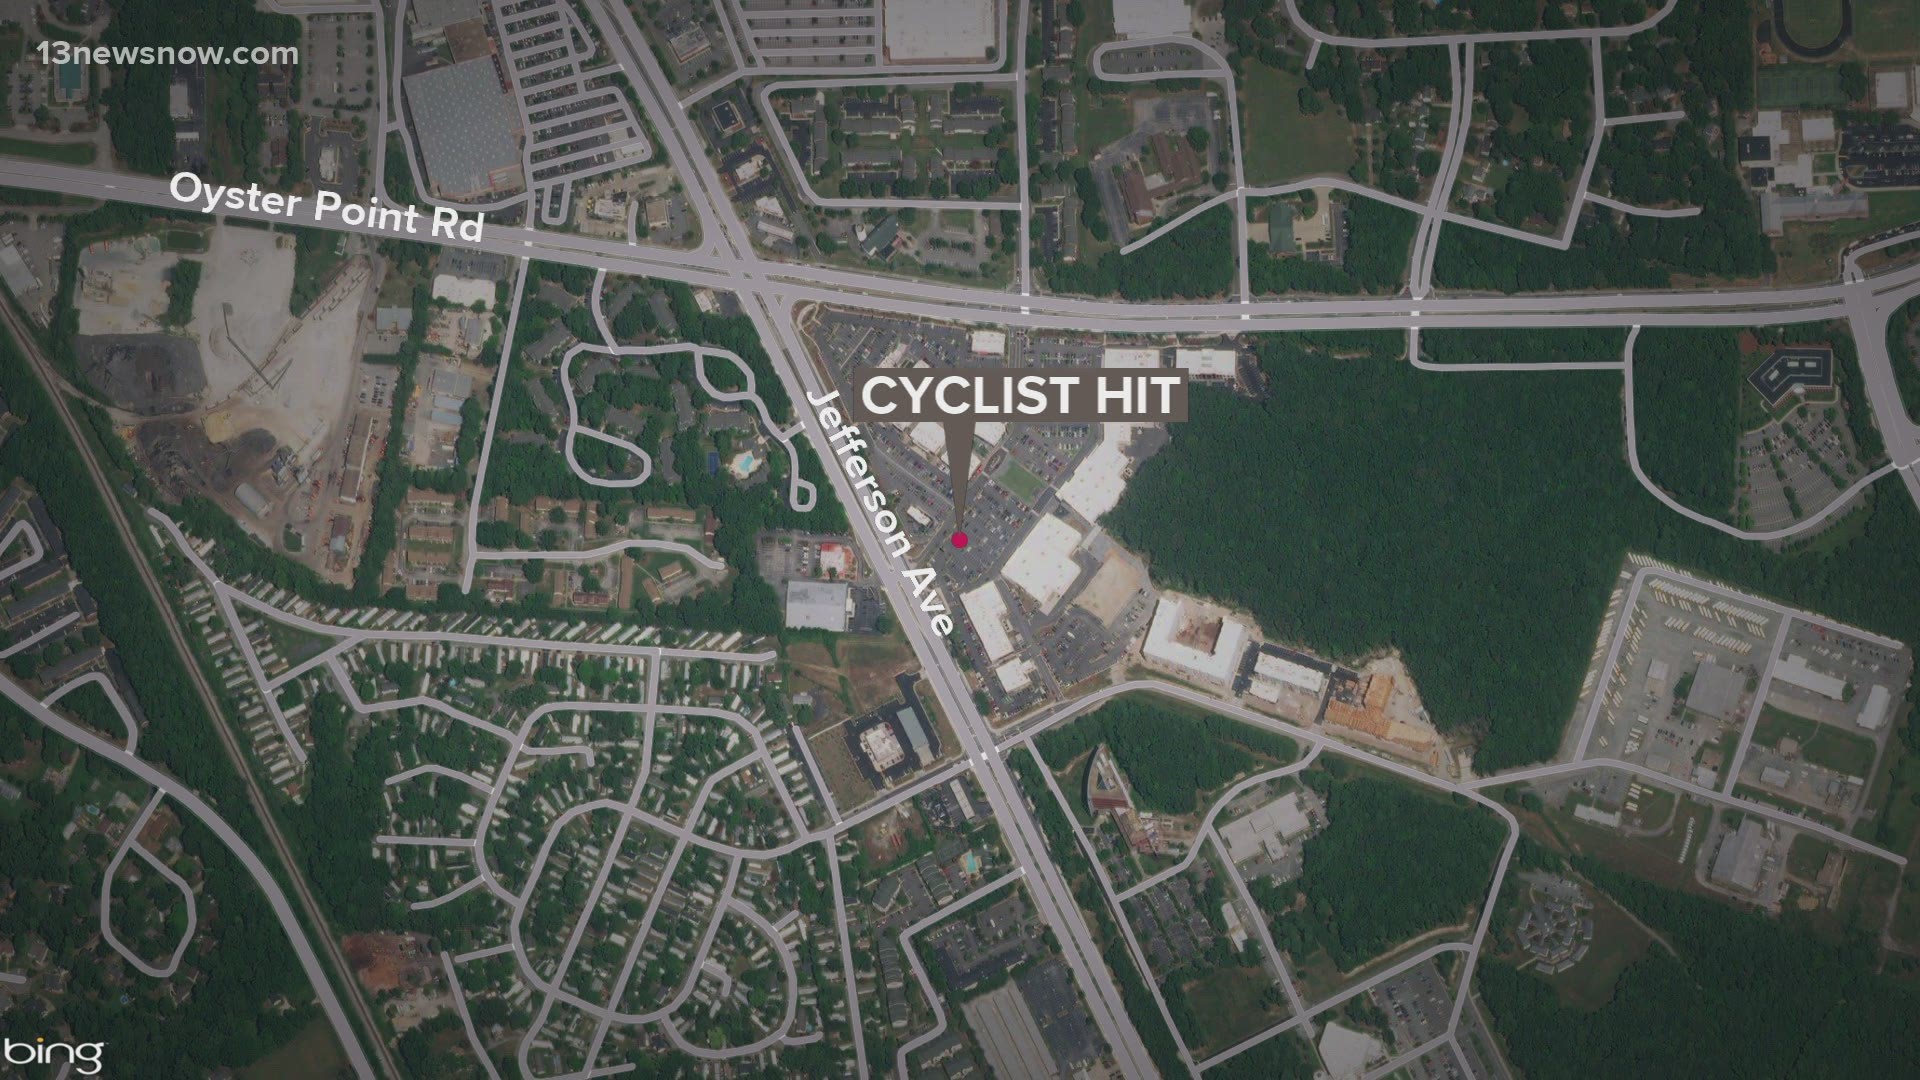 Police said a 52-year-old man was severely injured after he was hit by a pickup truck while riding a bicycle in the parking lot of Marketplace at Tech Center.